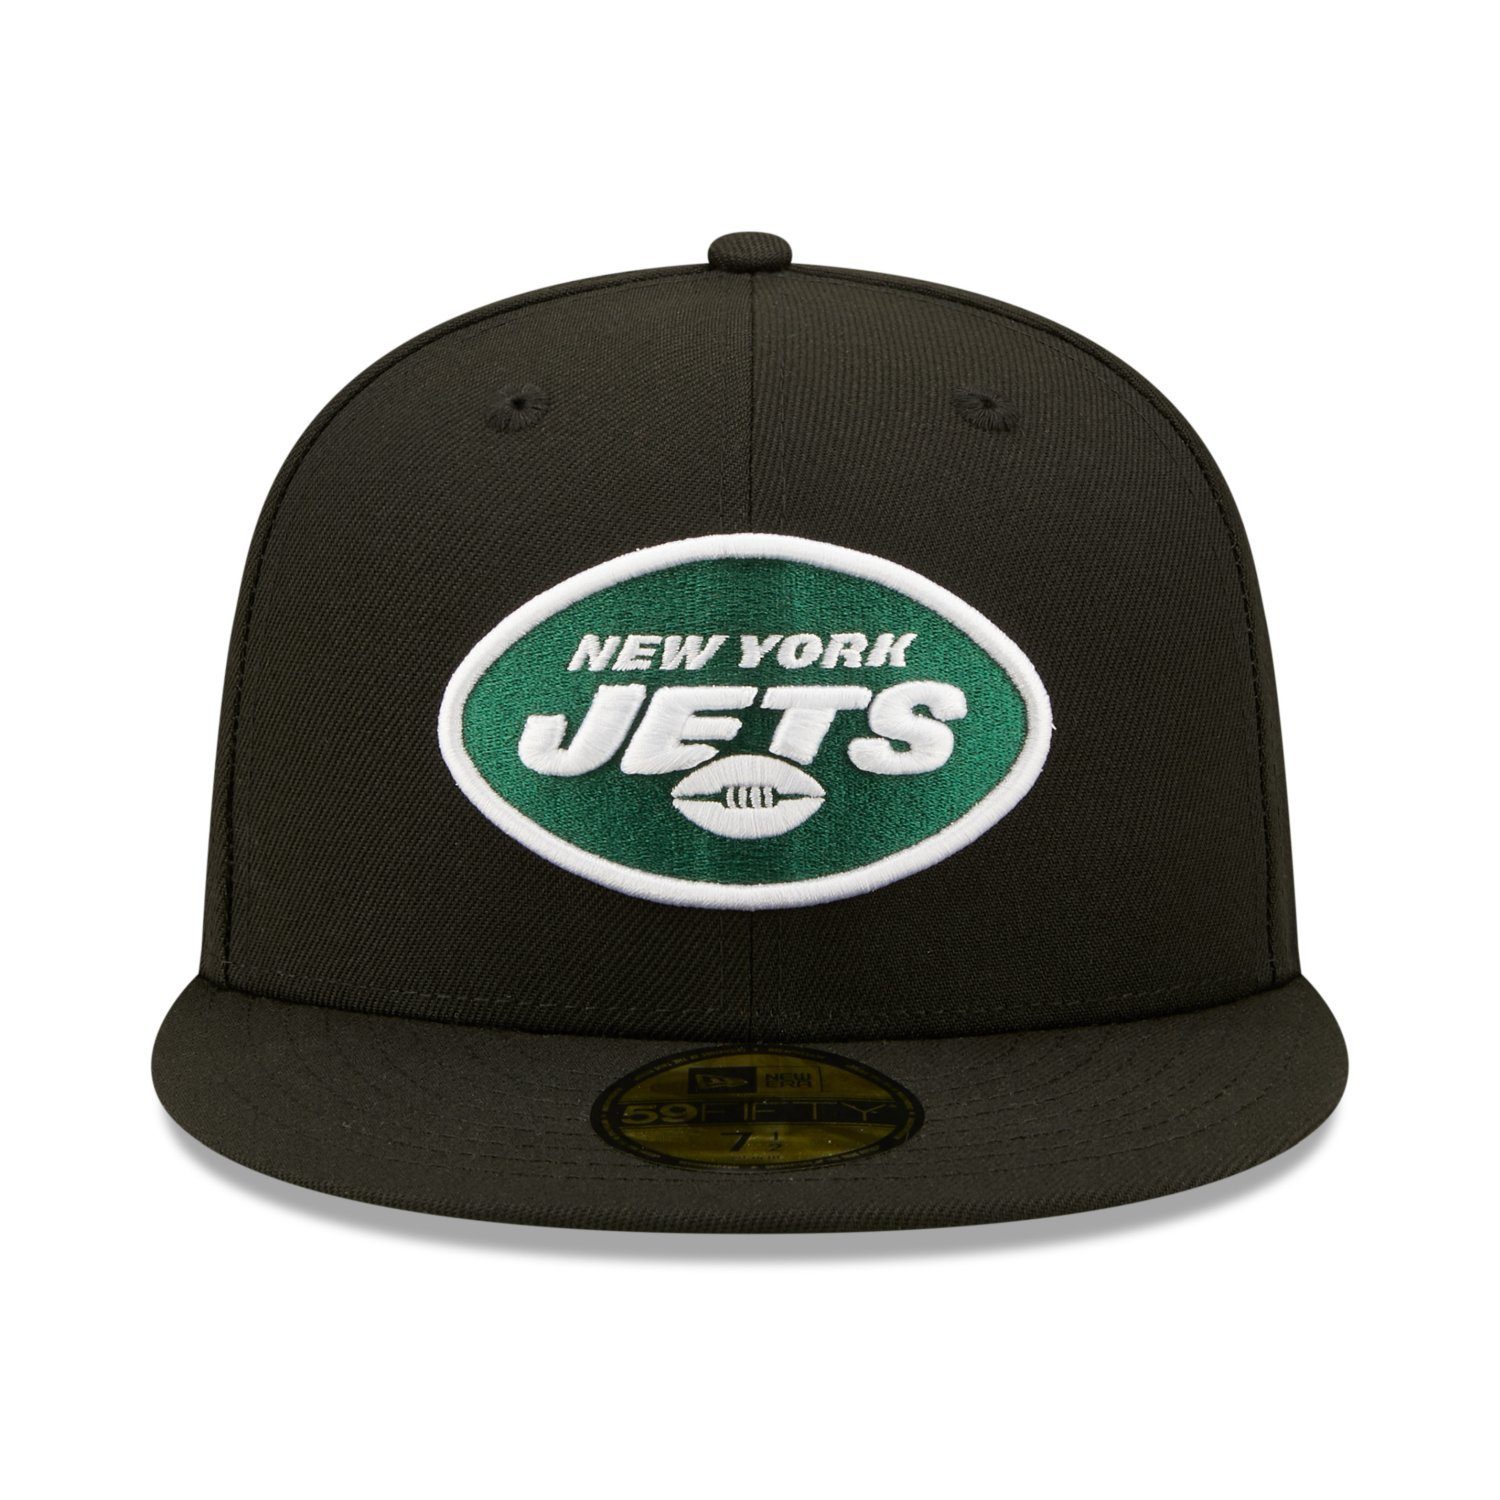 New New Fitted 59Fifty 50 Seasons Cap Jets Era York